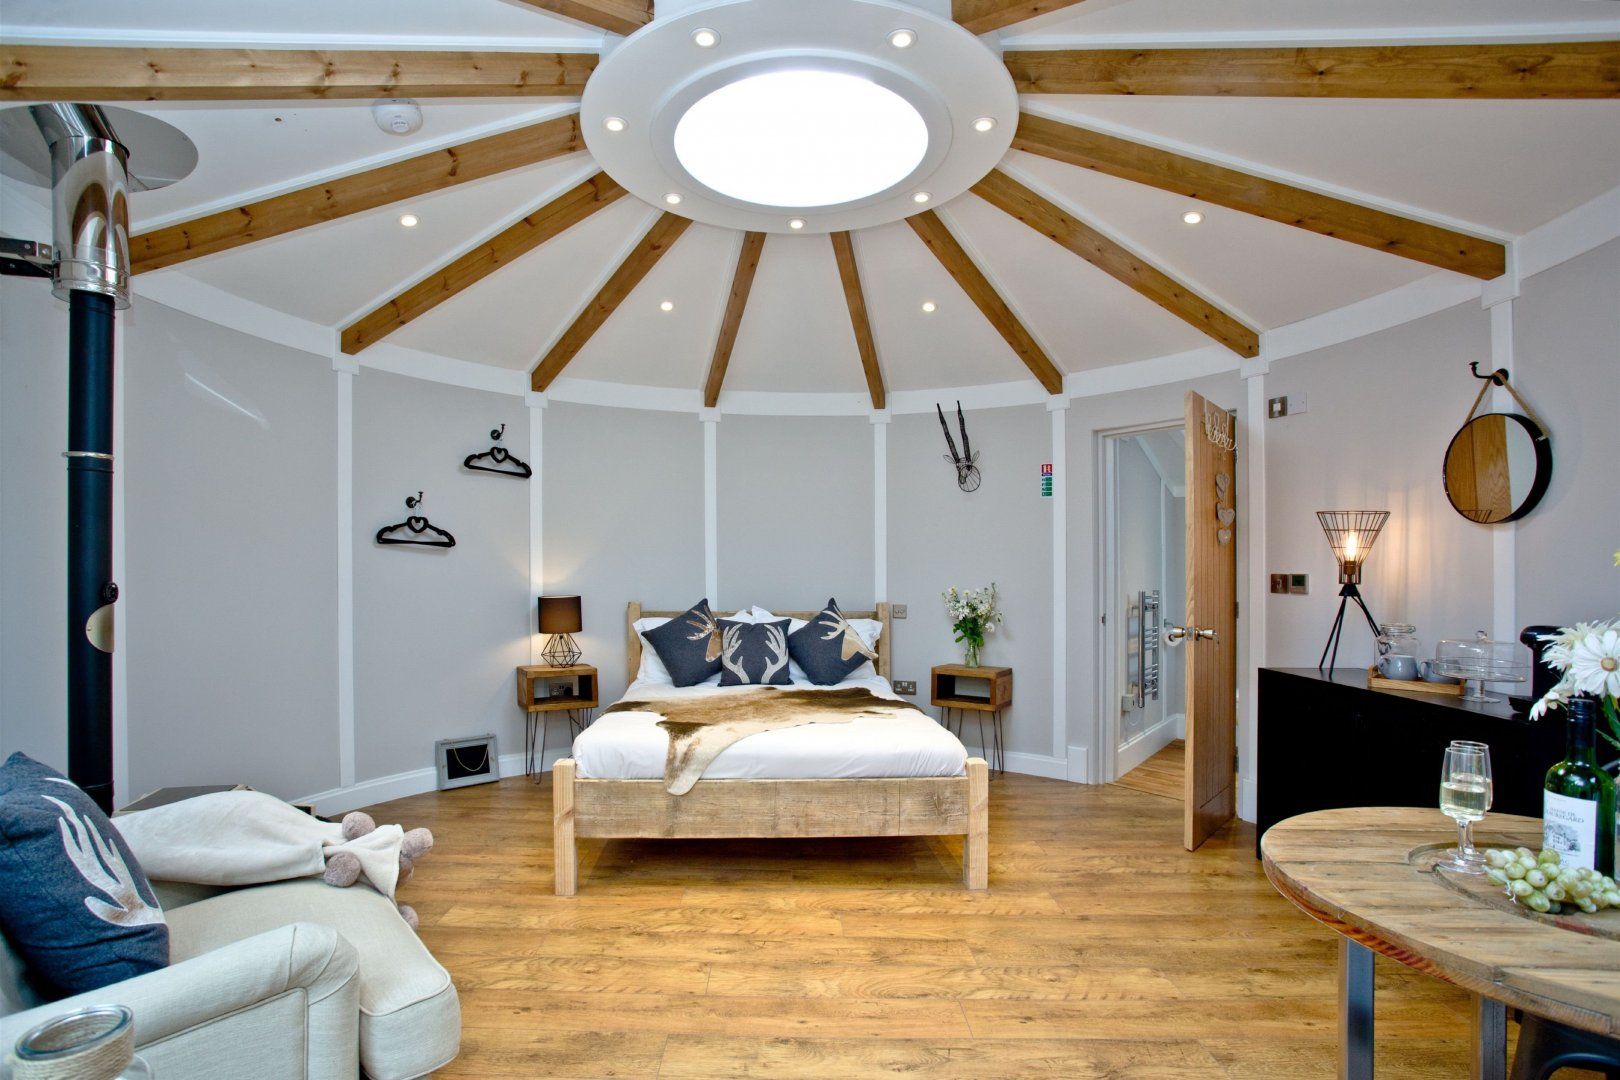 The Ocean Room Roundhouse, East Thorne, Bude photo 1